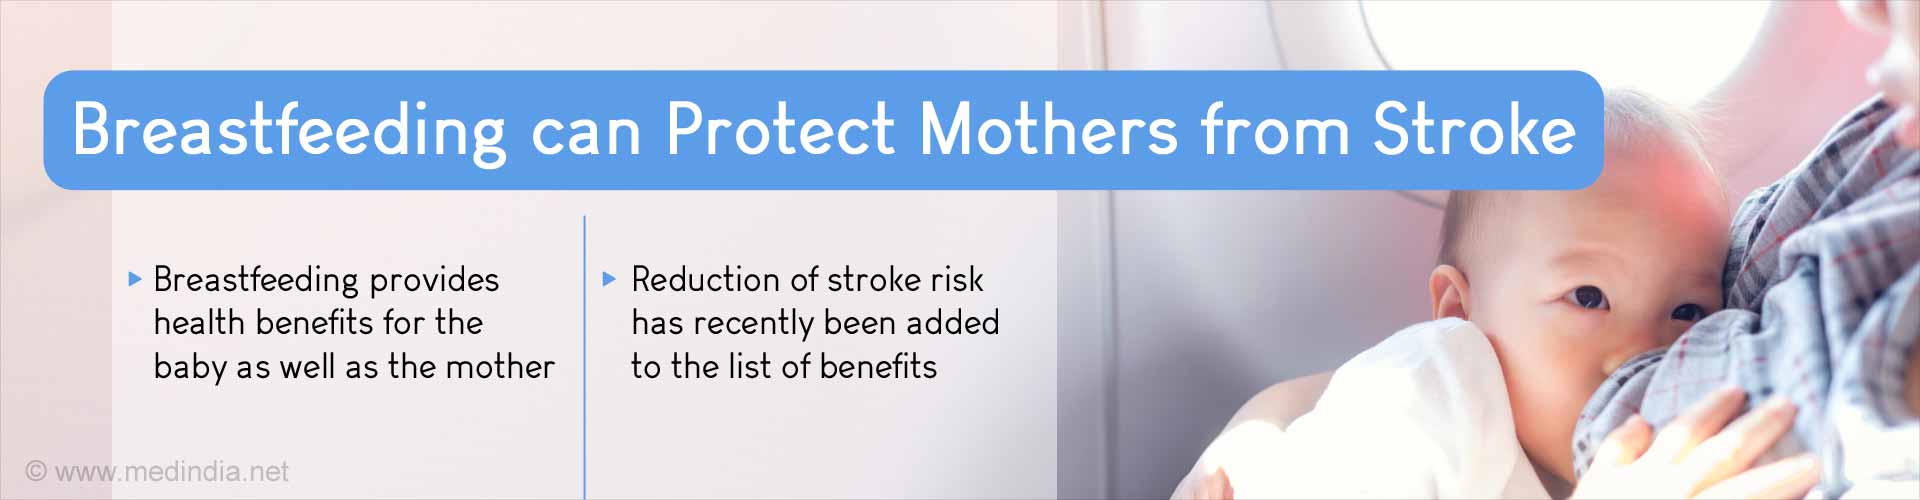 Stroke Risk Reduces in Women Who Have Breastfed Their Babies
